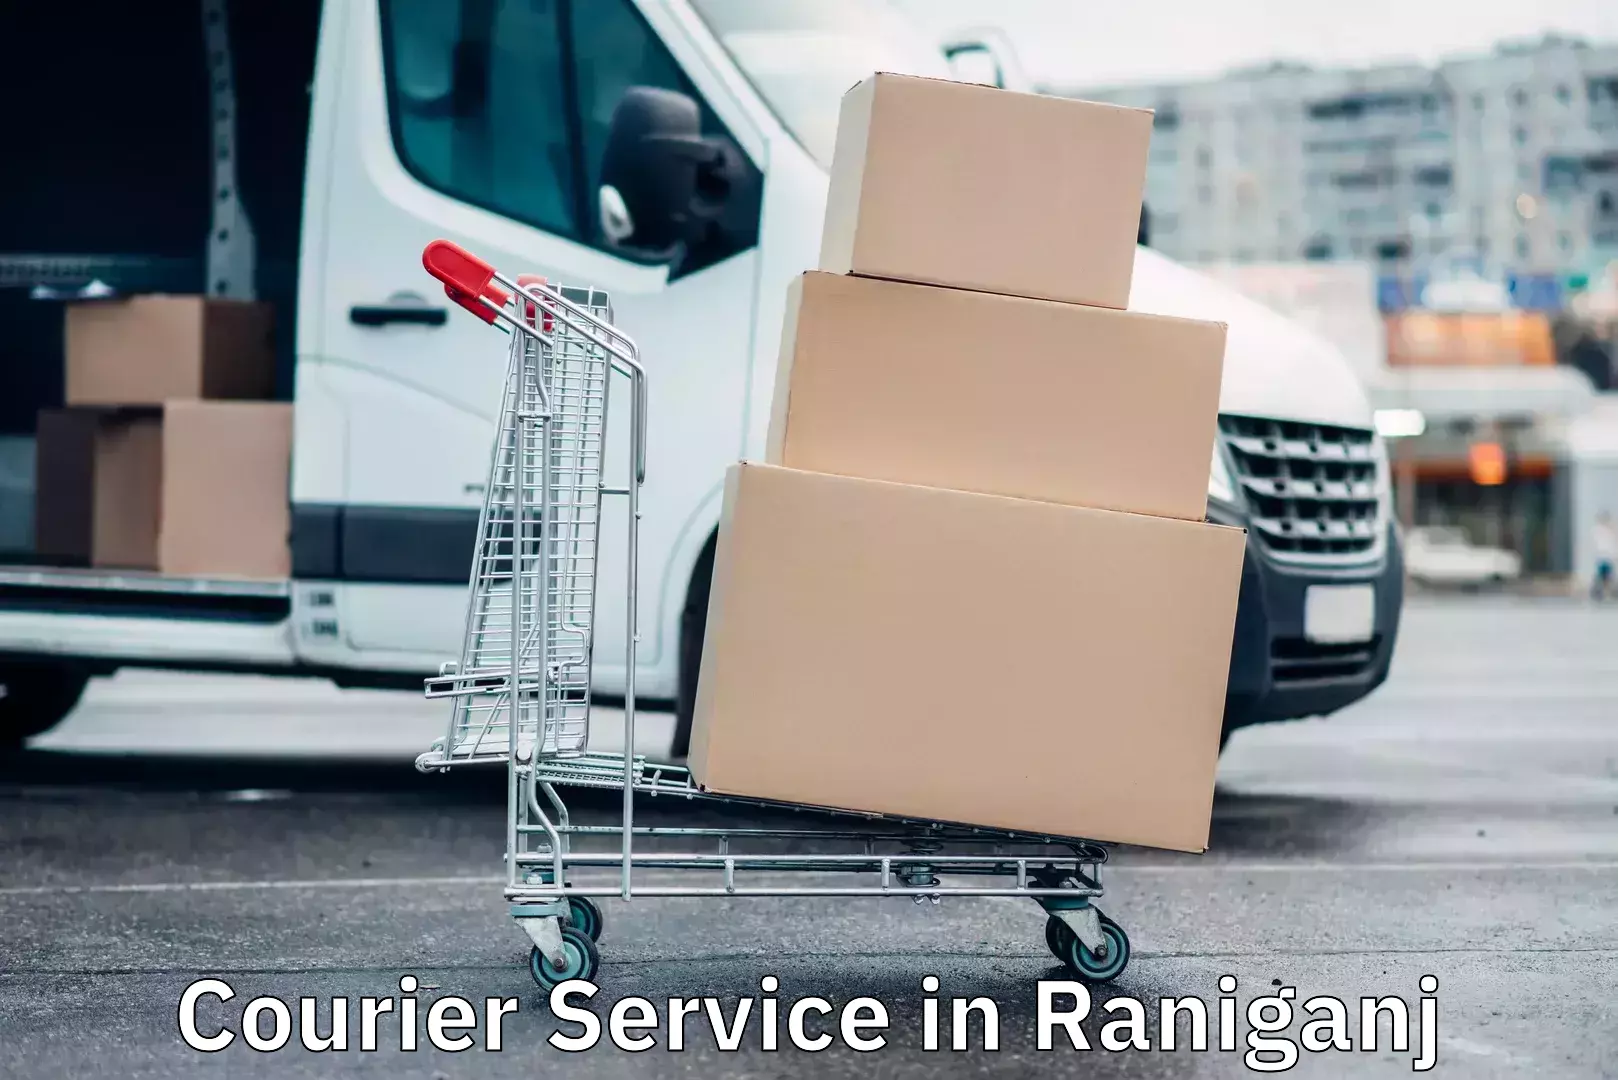 Supply chain delivery in Raniganj